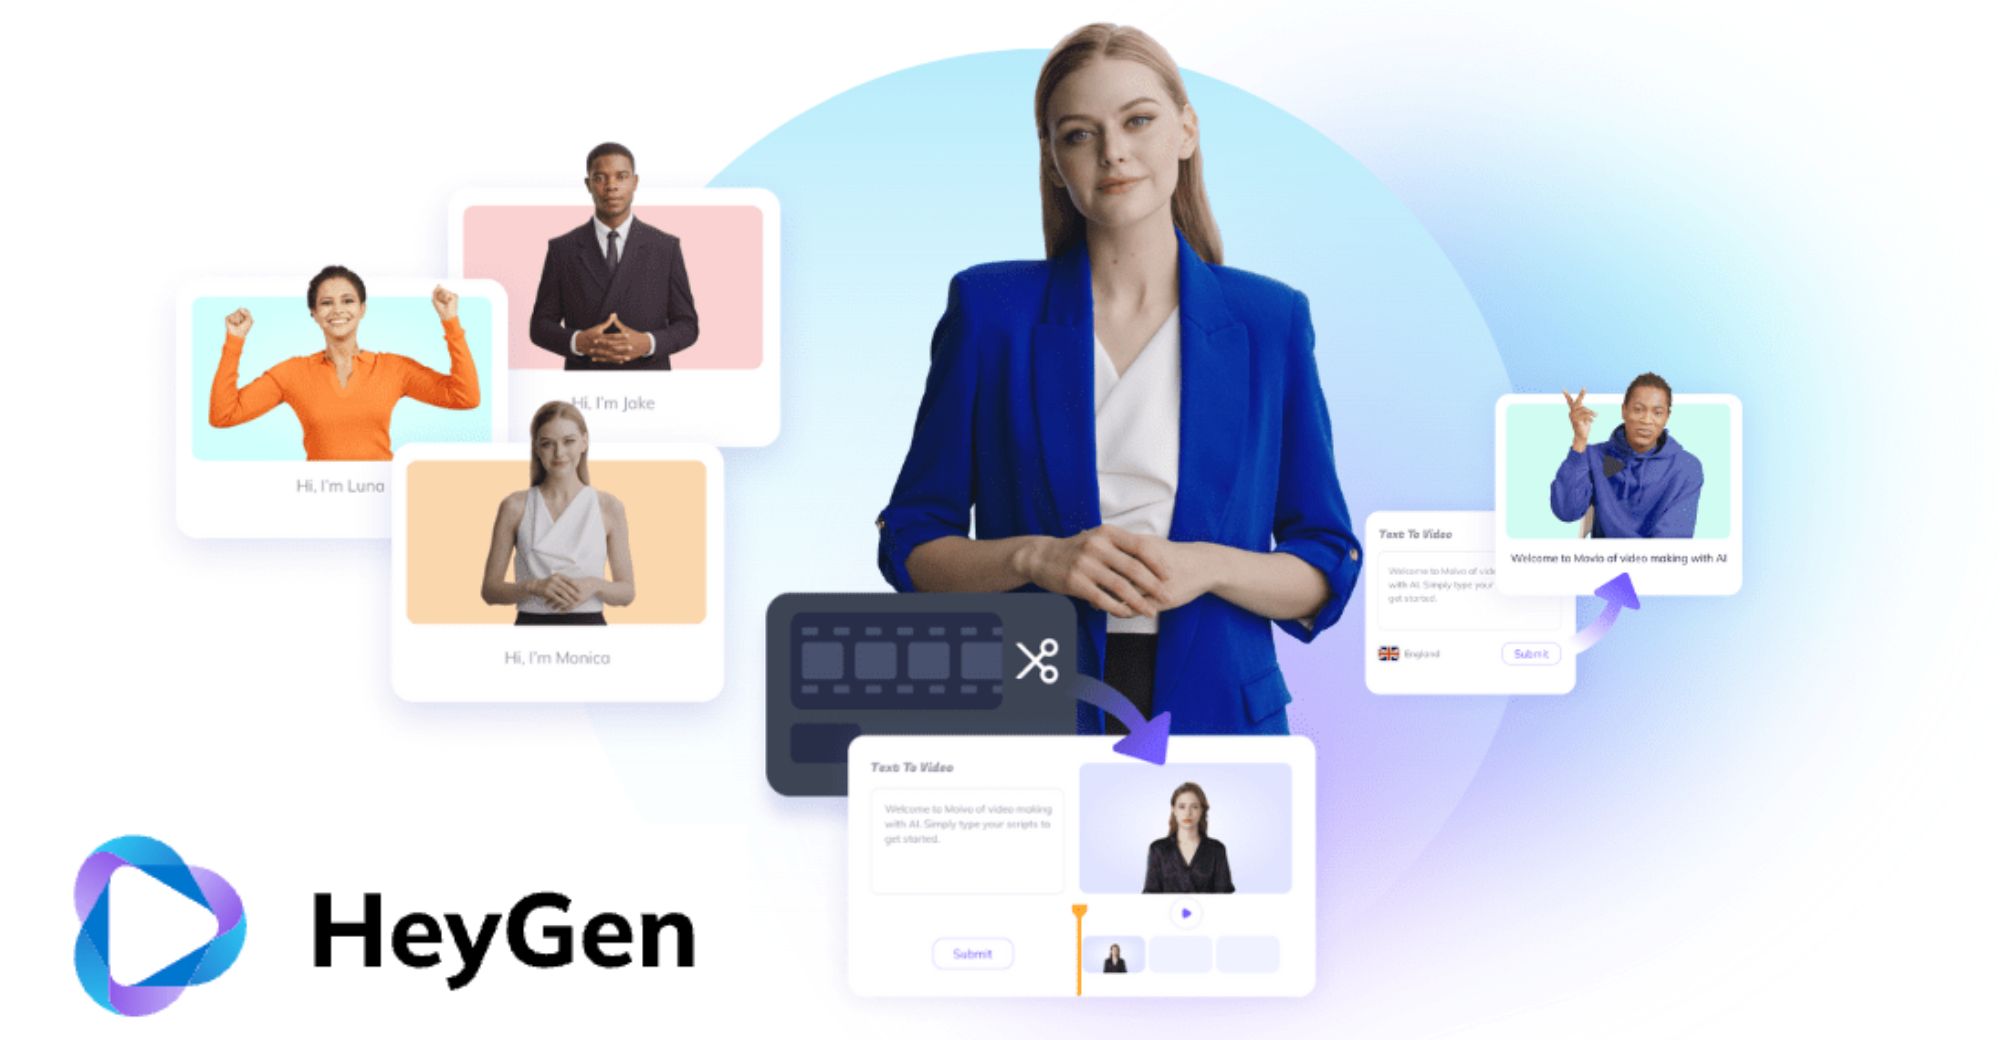 HeyGen Is Deregistering Its Domestic Entity, Possibly Related to A $5.6 Million New Funding Round